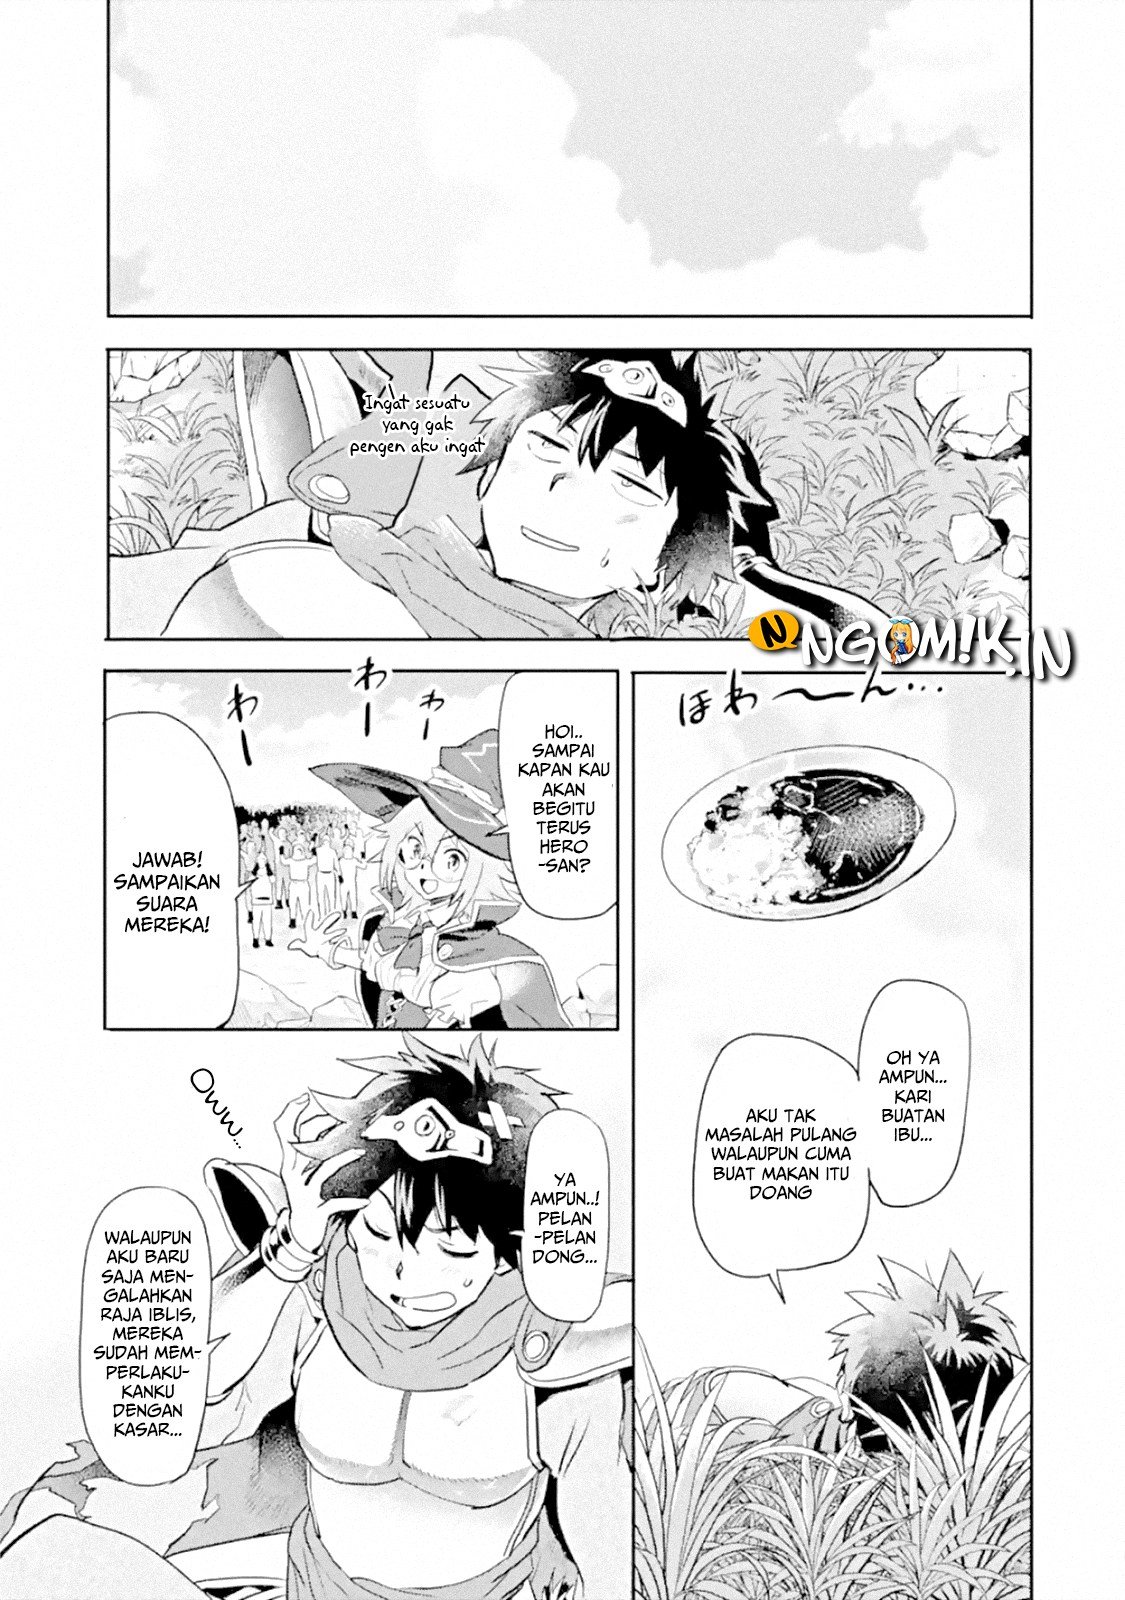 Baca The Hero Who Returned Remains the Strongest in the Modern World Chapter 1.2  - GudangKomik